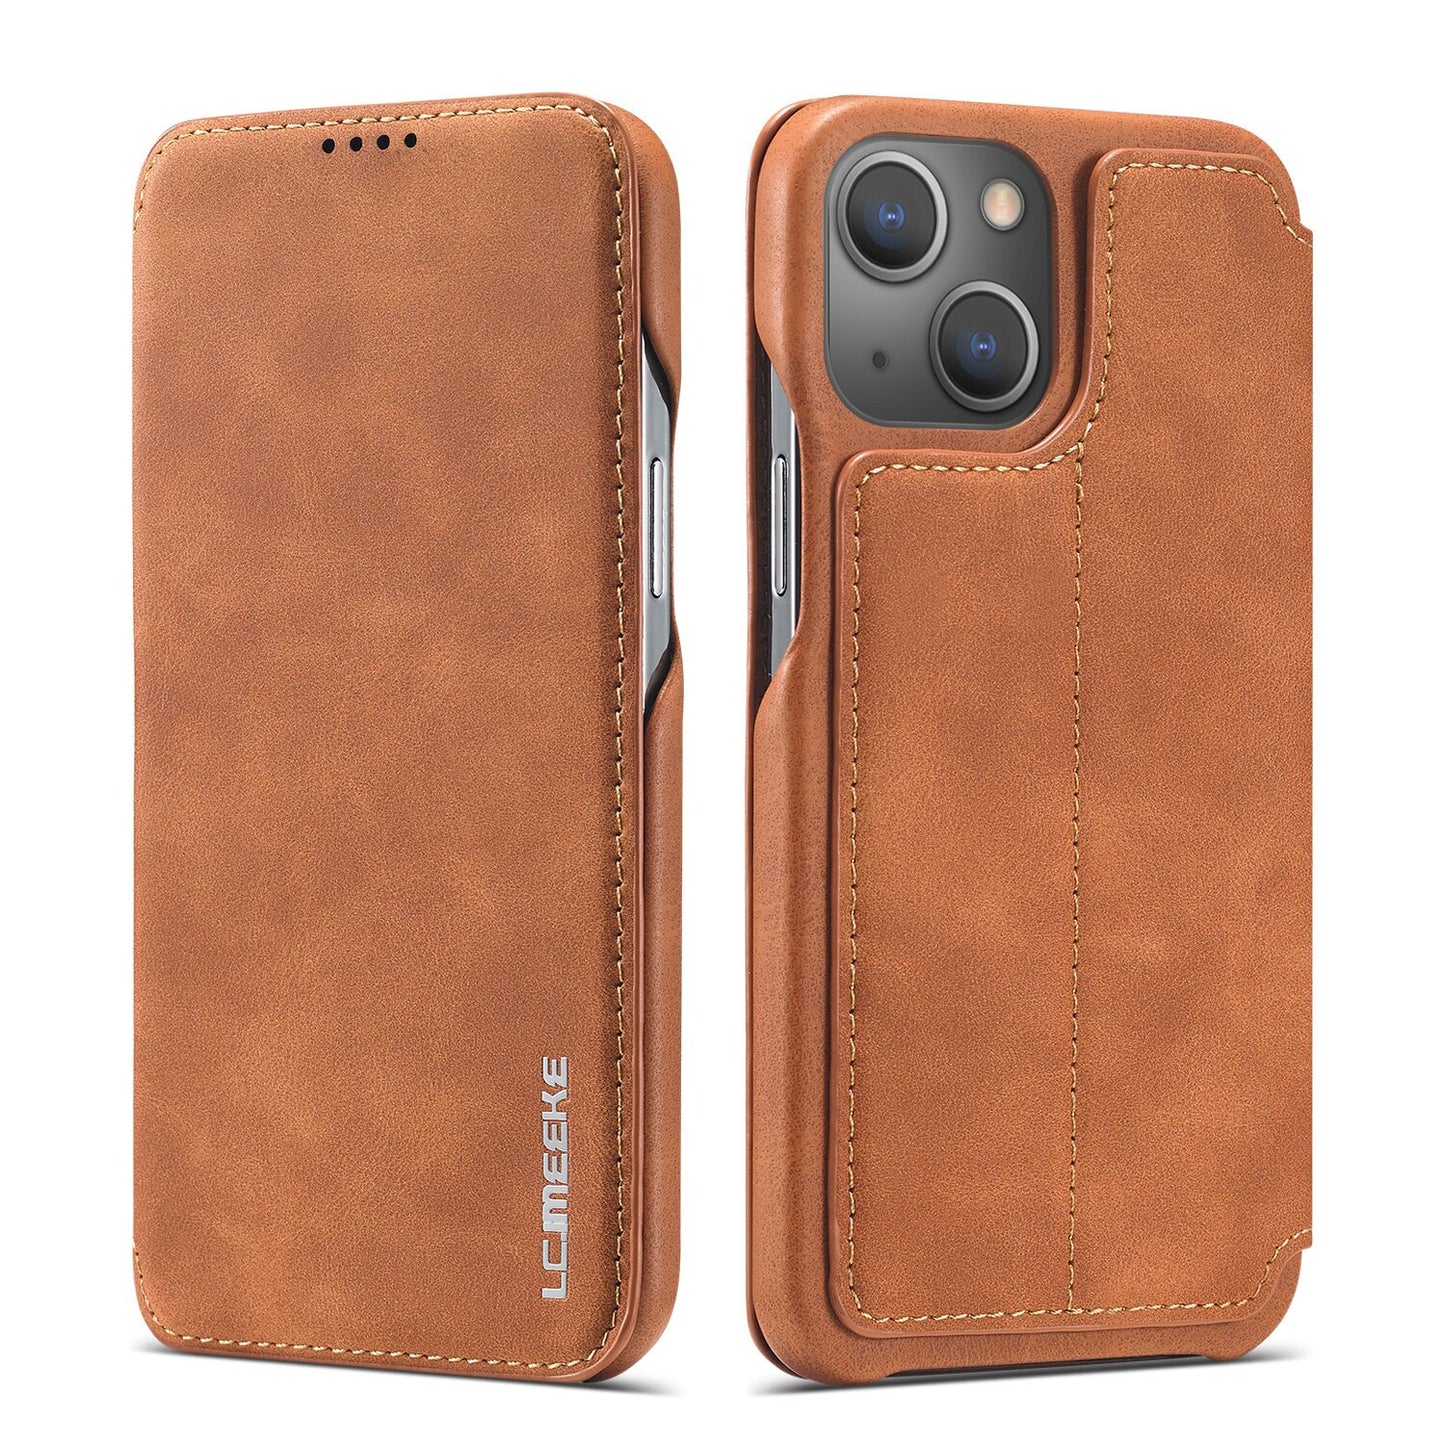 Premium Leather iPhone Wallet Case: Protect Your Phone in Style - Color A / For iPhone 6 6s - sky-cover